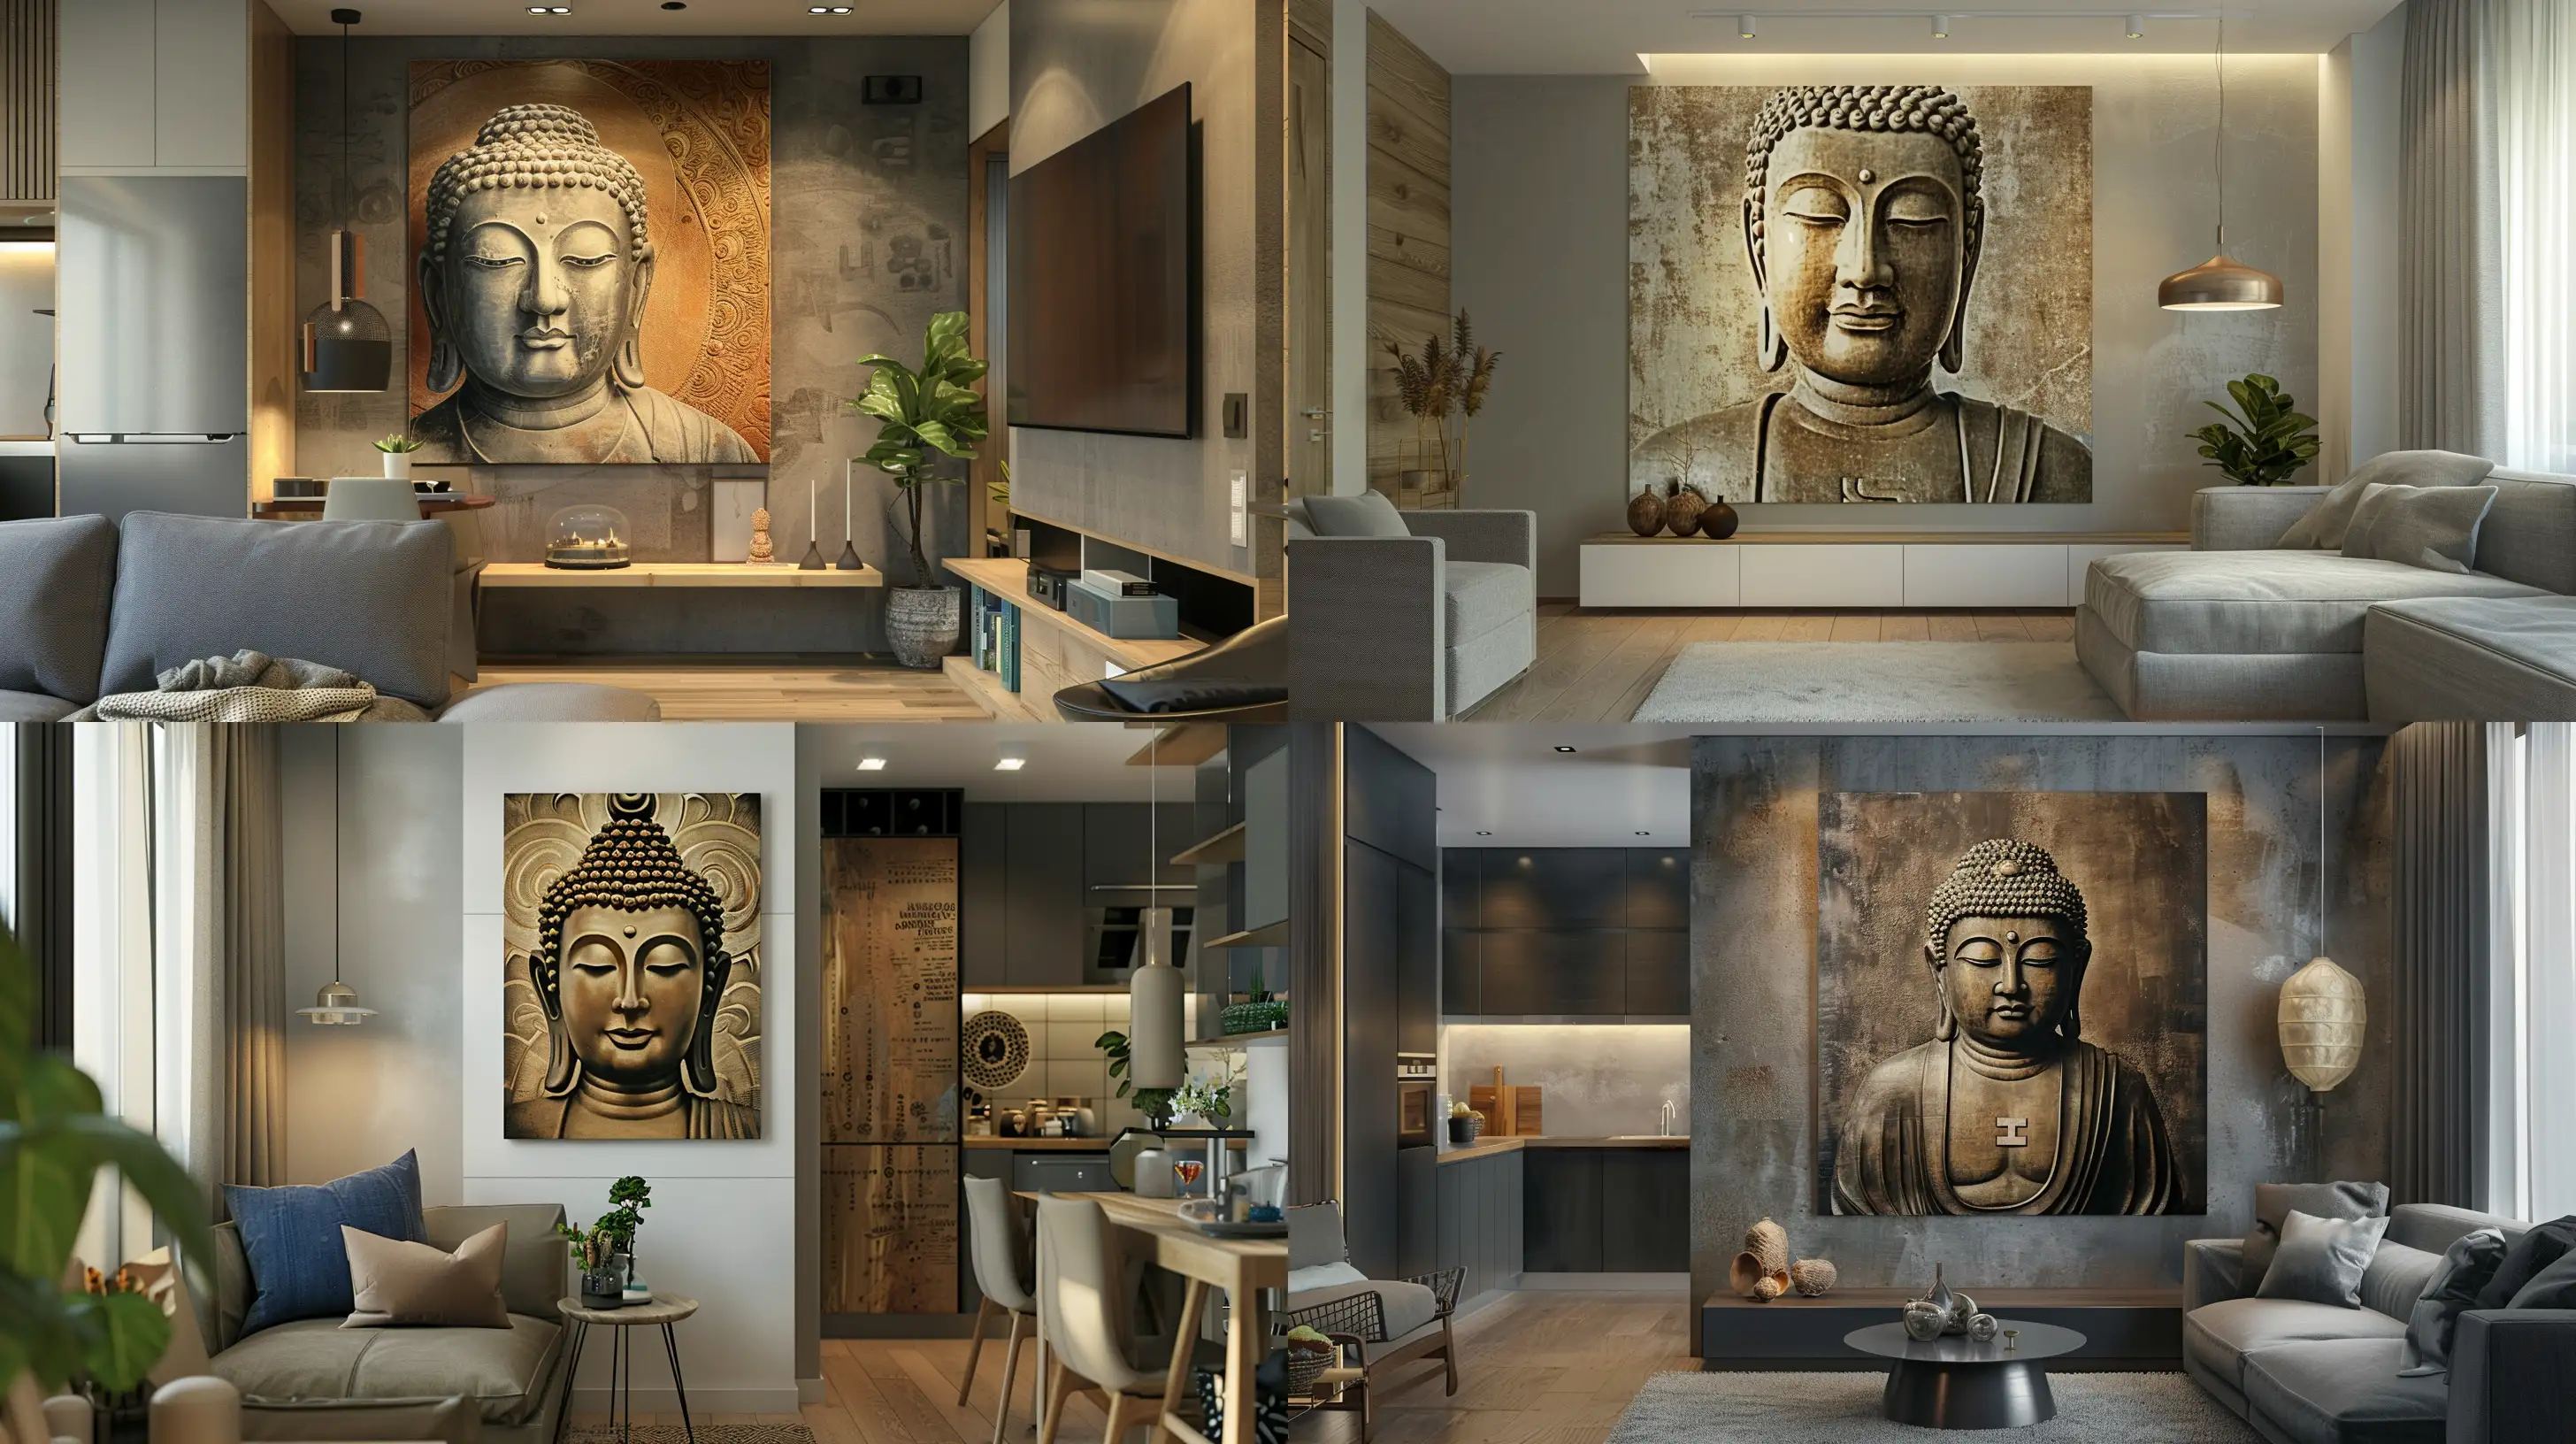 A compact modern living area in an apartment, showcasing a prominent photographic-style painting of Buddha, capturing a serene and lifelike presence, integrated into the everyday living space. Created Using: cozy modernity, high-resolution photographic detail of Buddha as focal point, smart use of space, modern decor elements, intimate and welcoming, art-centric interior design --ar 16:9 --v 6.0